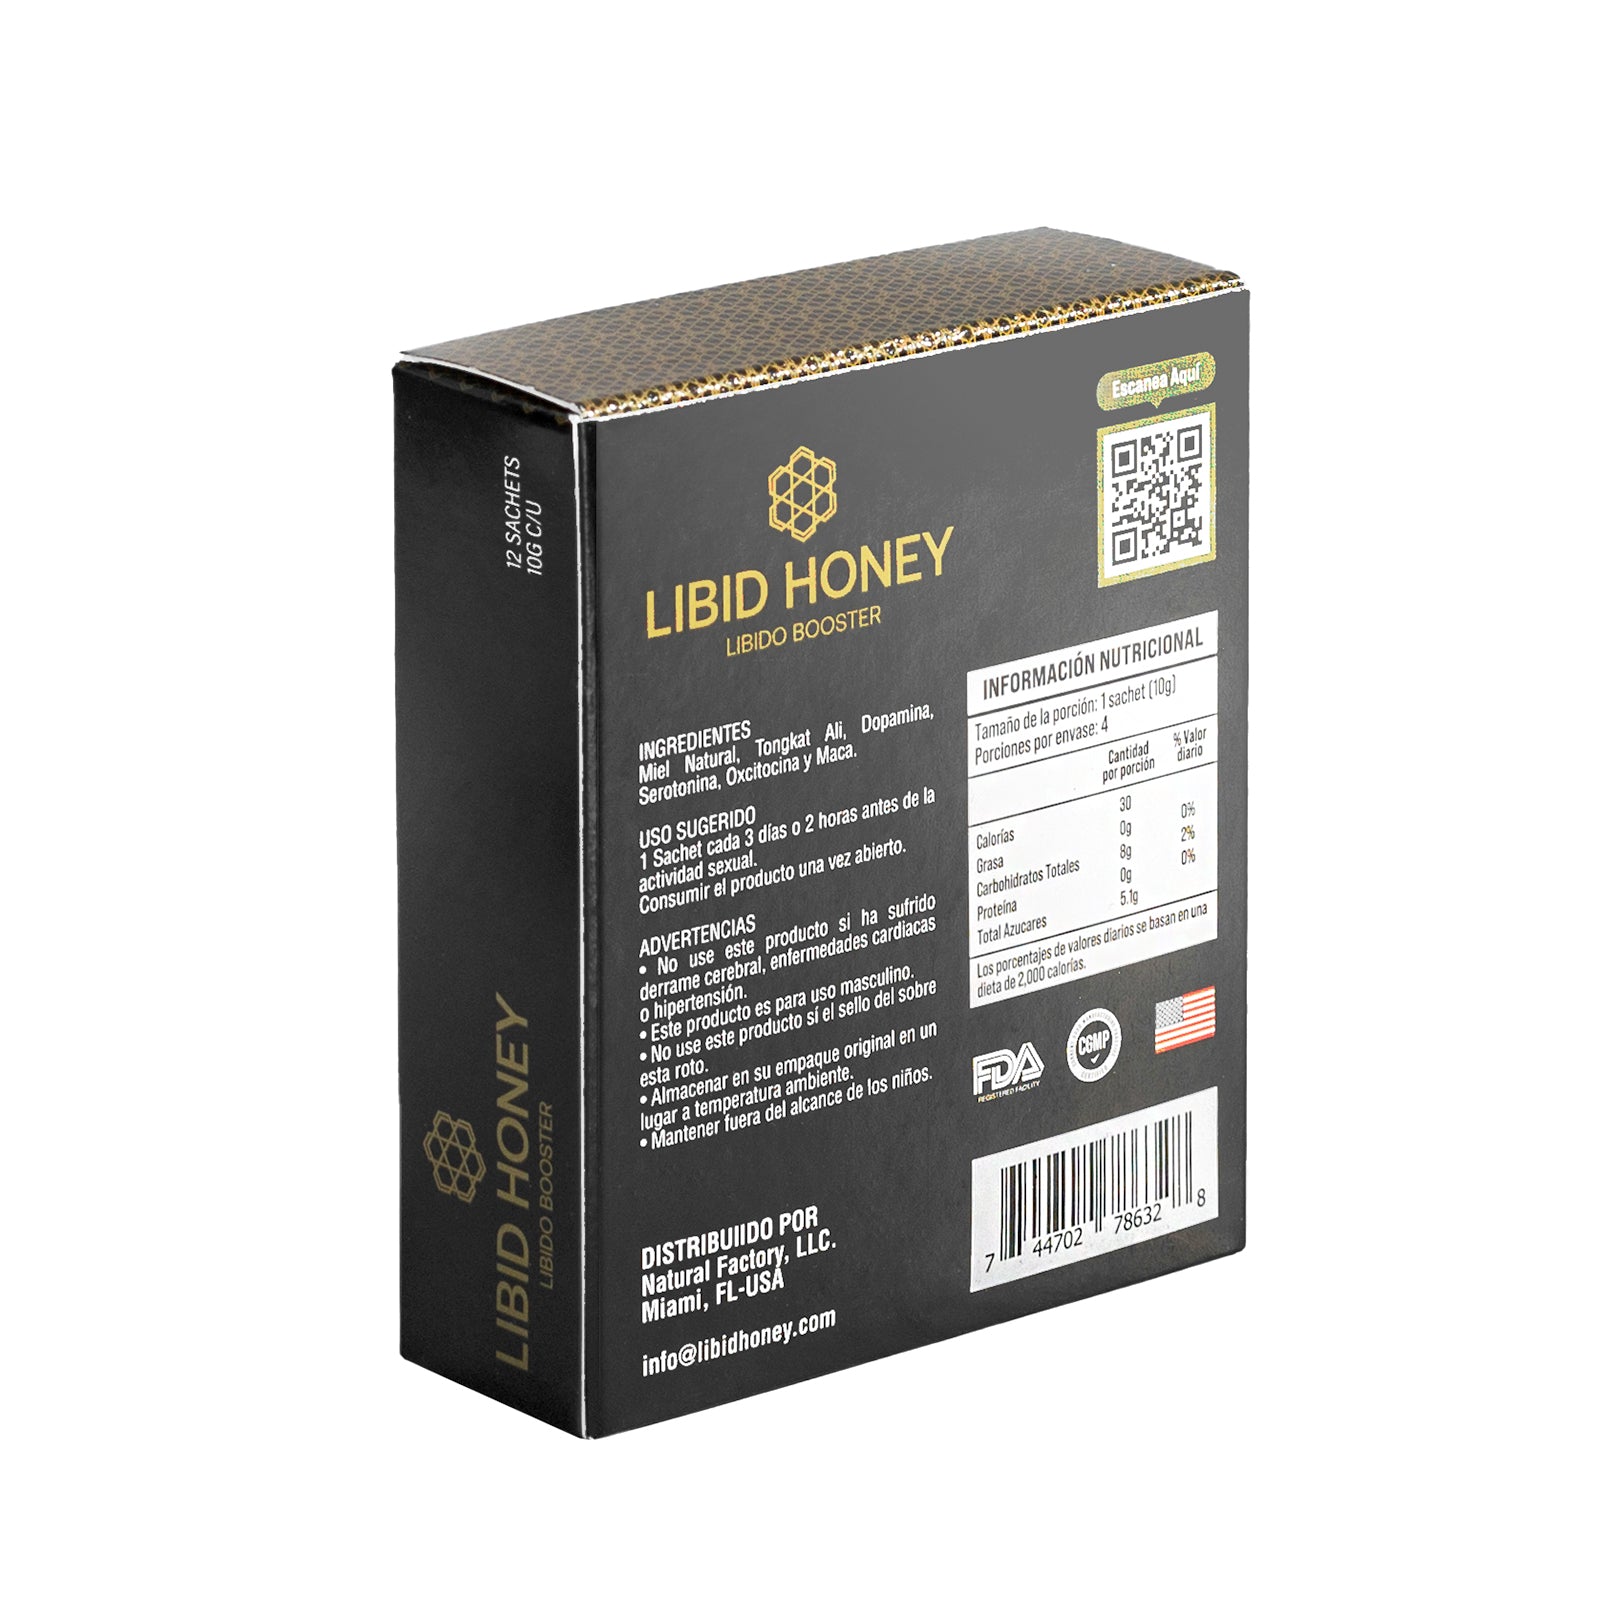 Libid Honey box from back in perspective. Libido Booster. Contains 12 sachet. 10 G each.